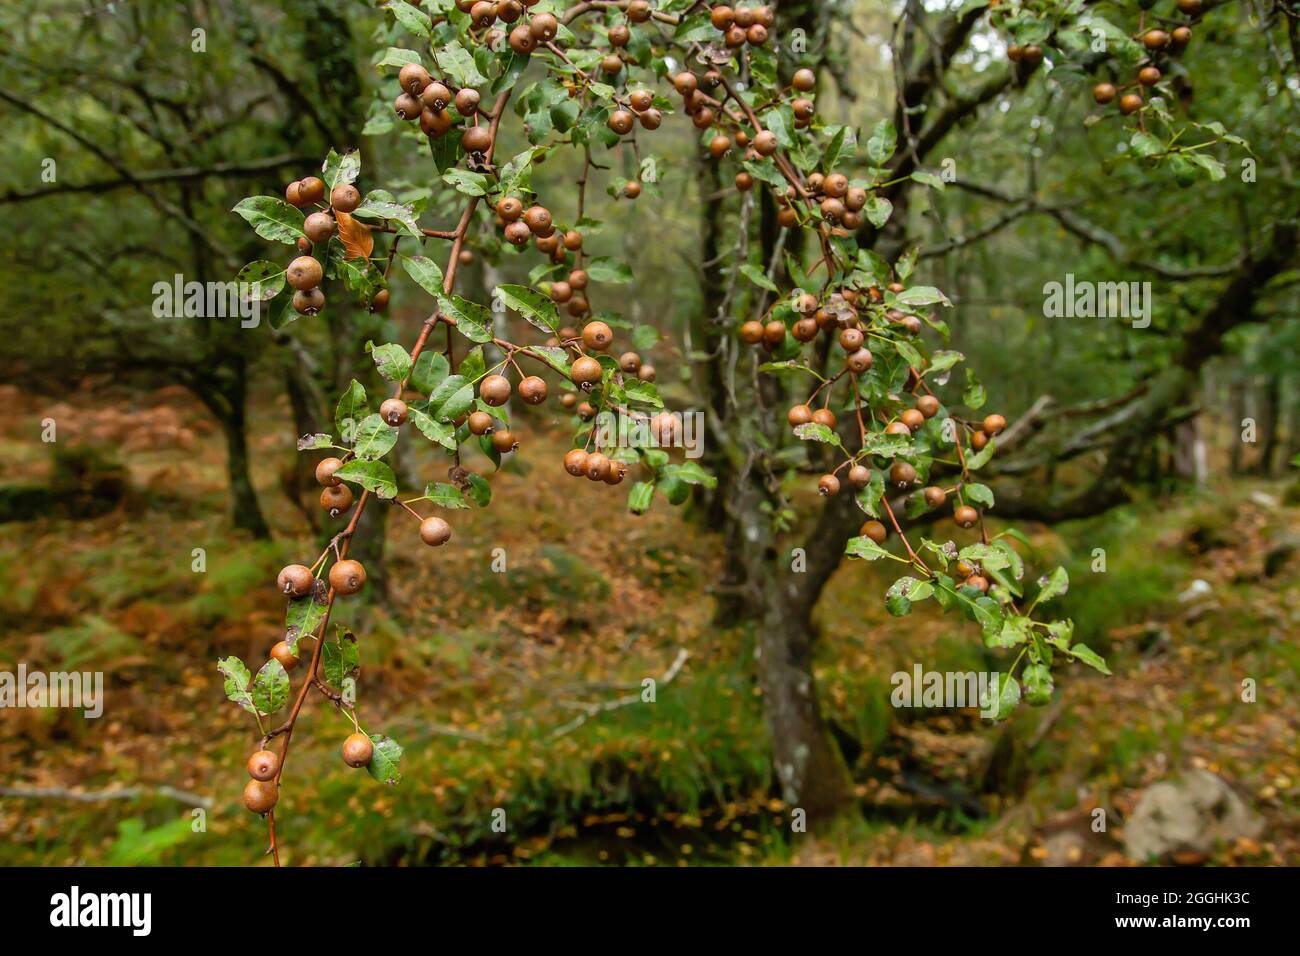 Pyrus cordata known as Plymouth pear wild tree foliage with fruits Stock Photo